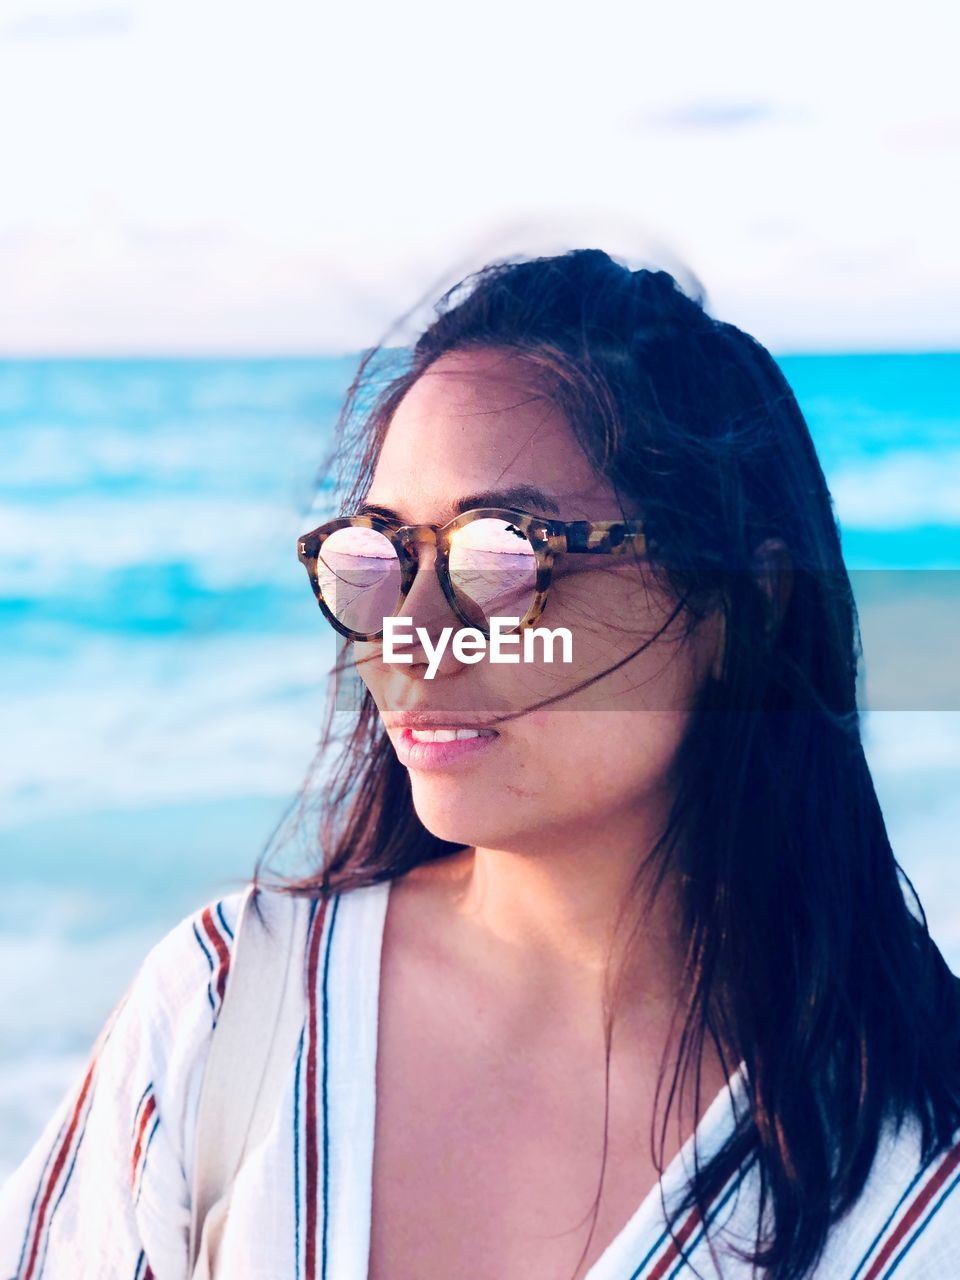 YOUNG WOMAN WEARING SUNGLASSES AGAINST SEA